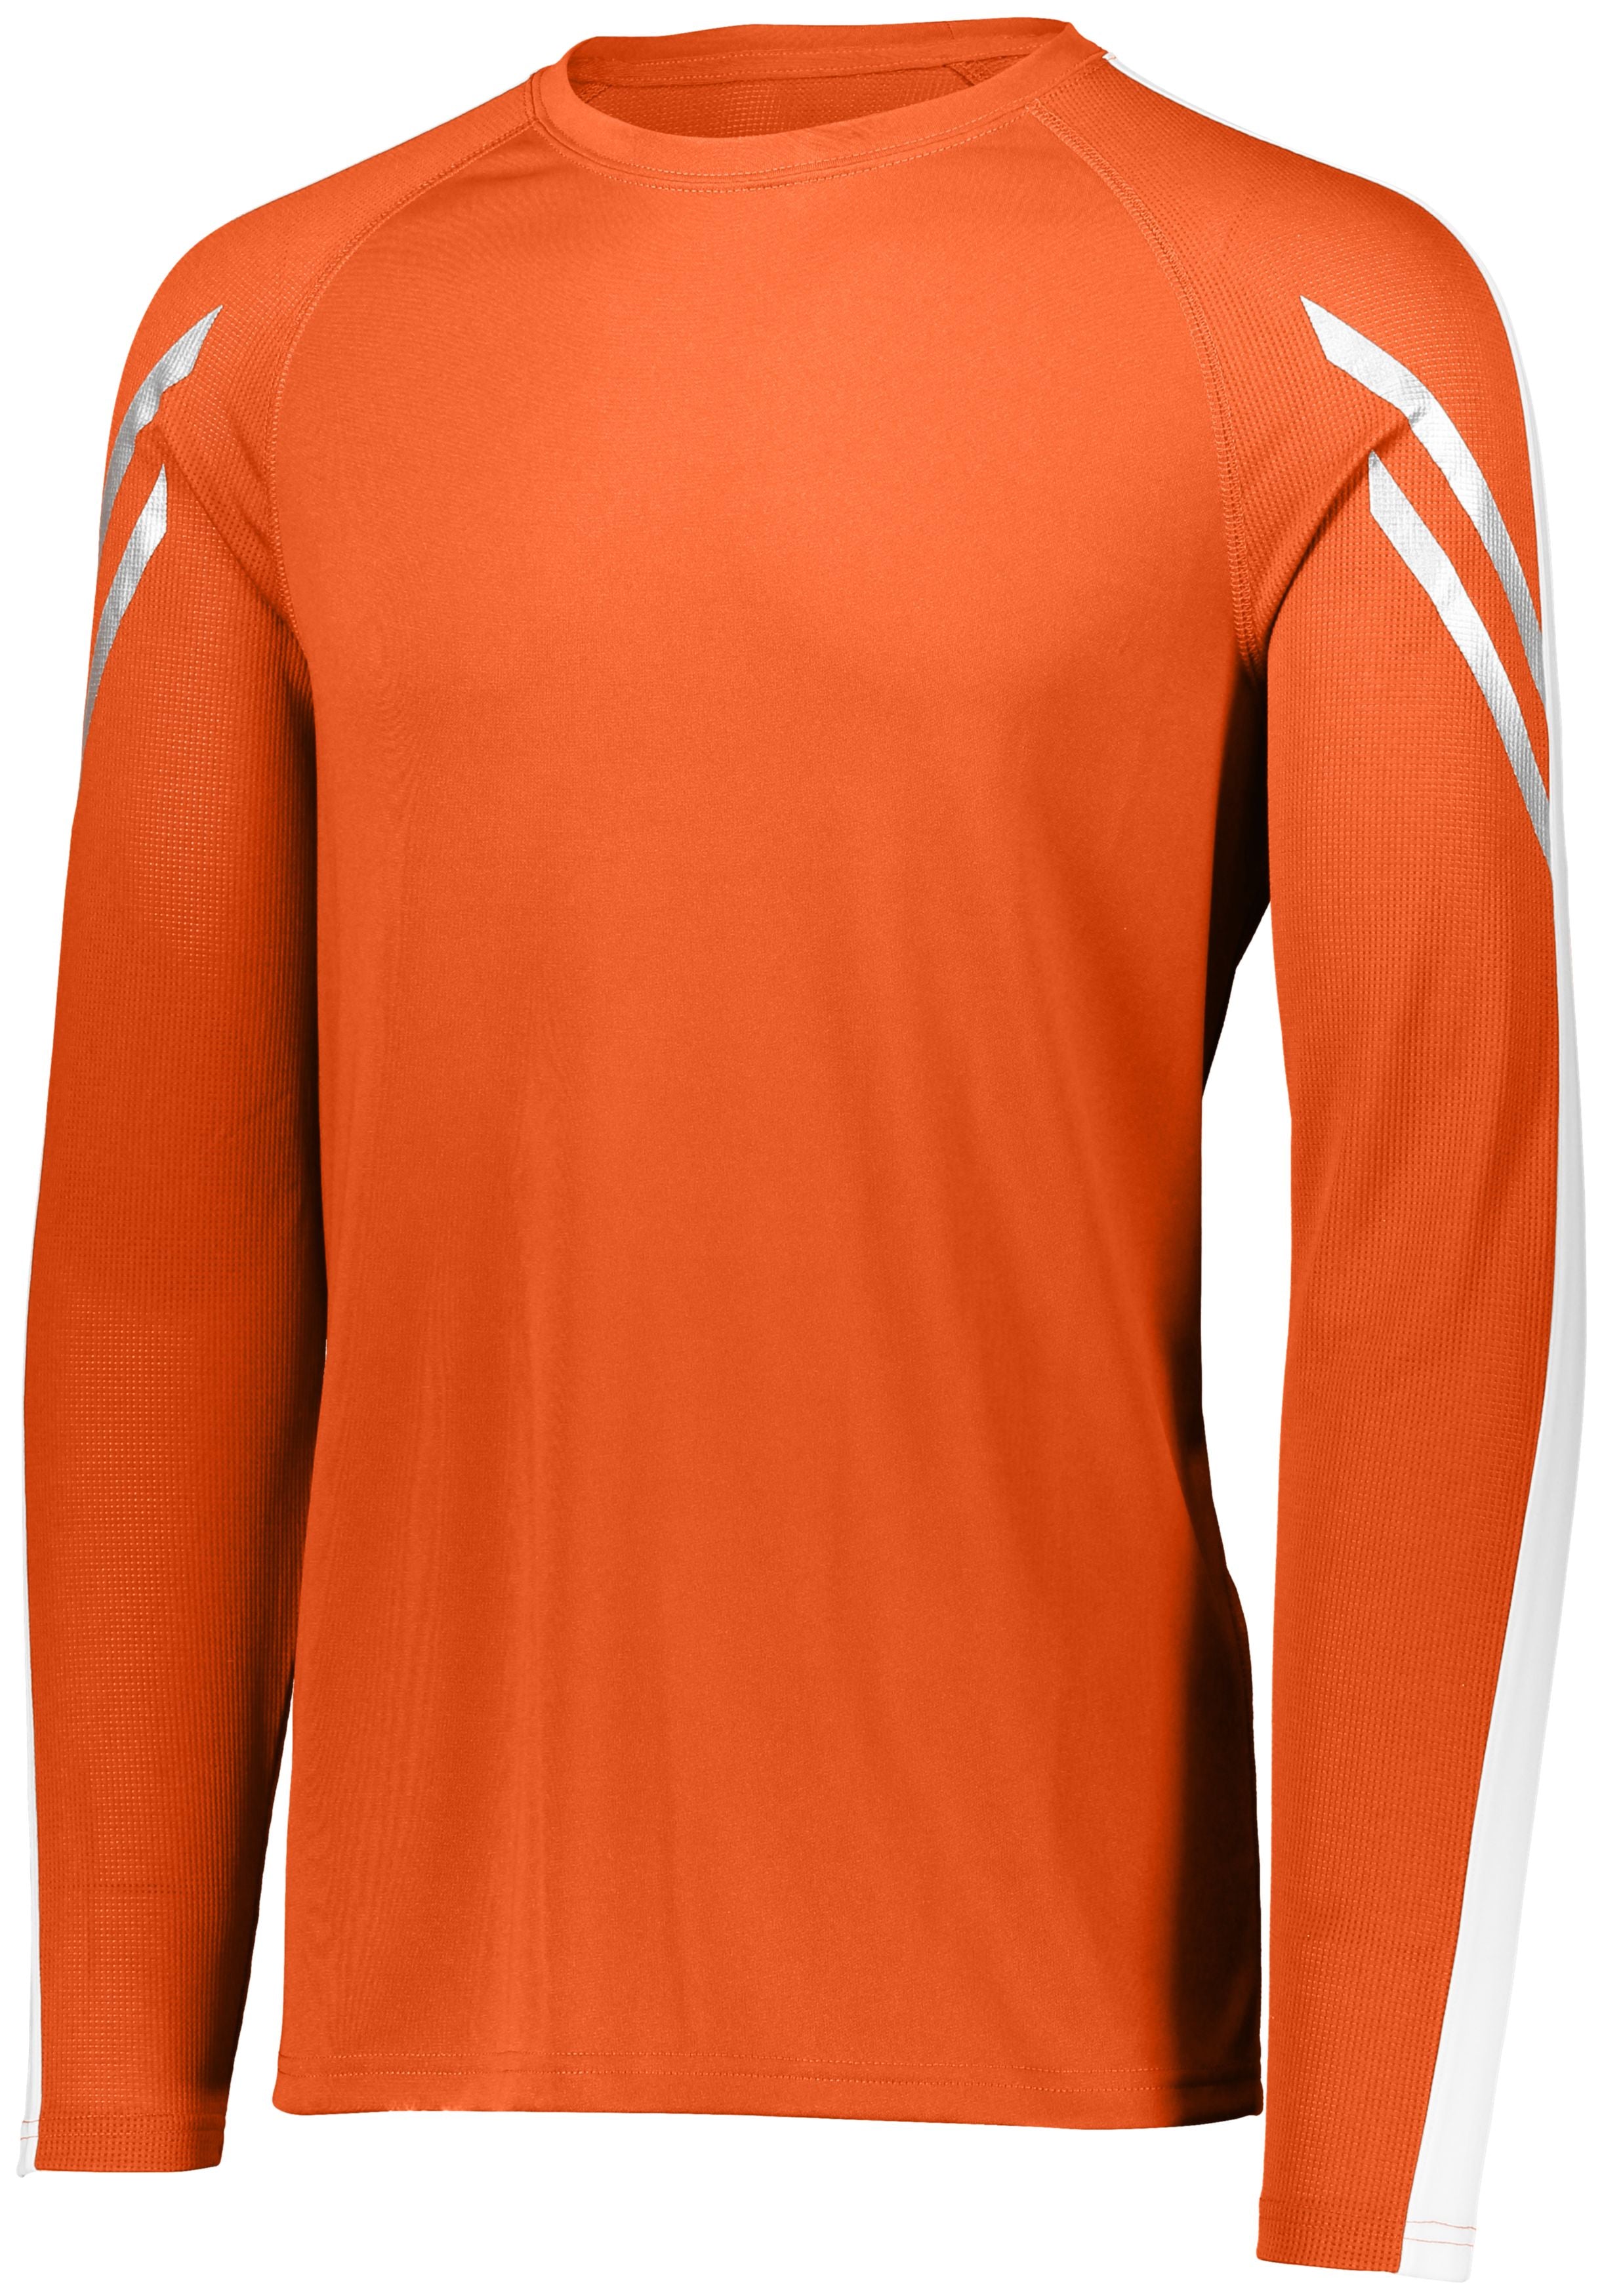 Holloway Flux Shirt Long Sleeve in Orange/White  -Part of the Adult, Holloway, Shirts, Flux-Collection product lines at KanaleyCreations.com